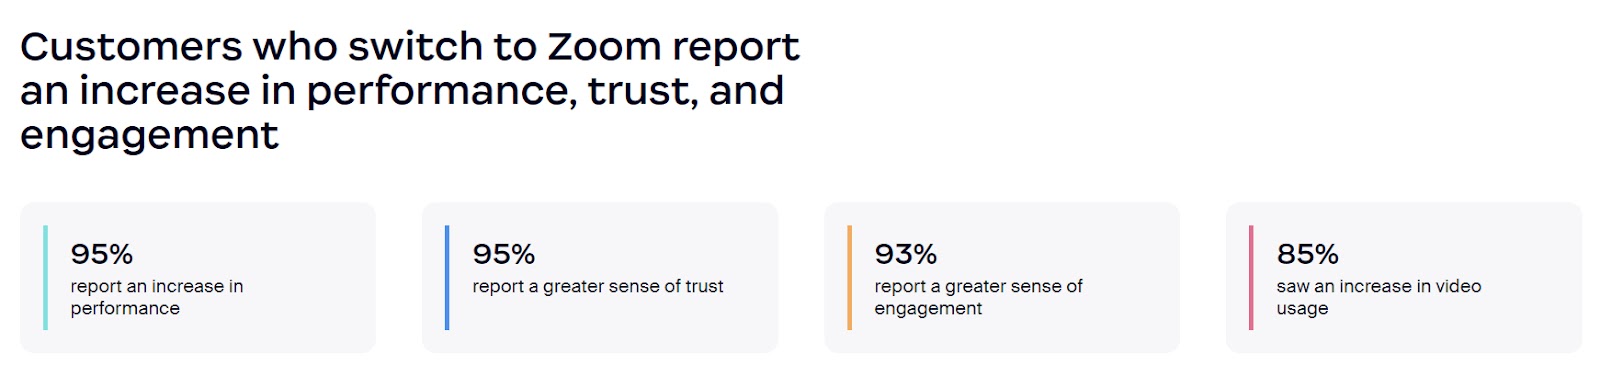 "Customers who switch to Zoom report an increase in performance, trust, and engagement